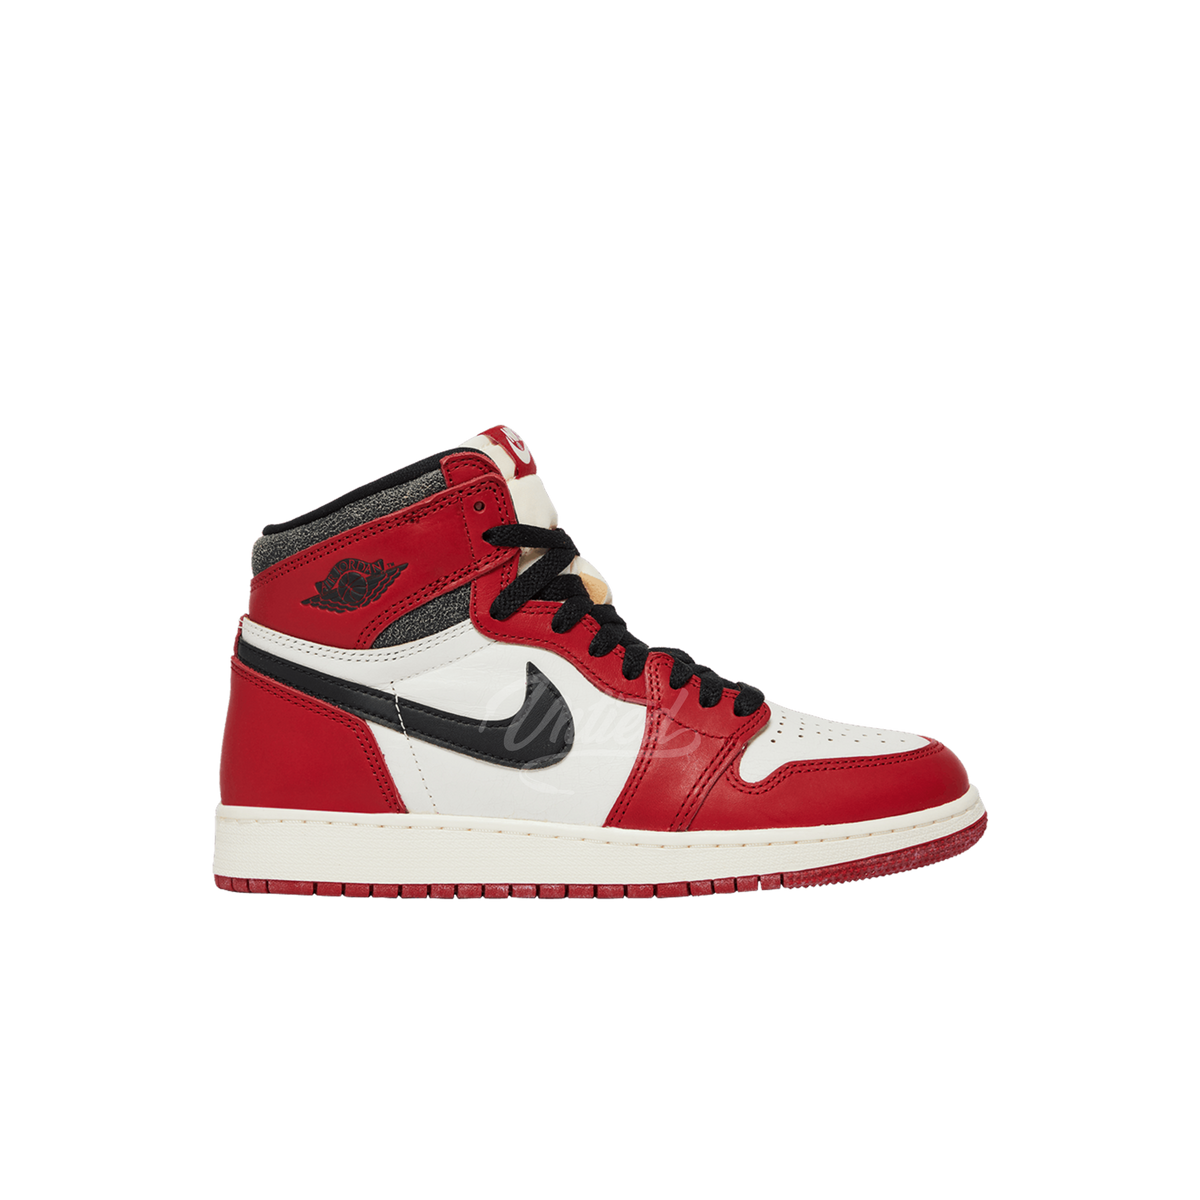 Air Jordan 1 "Lost and Found" (GS)